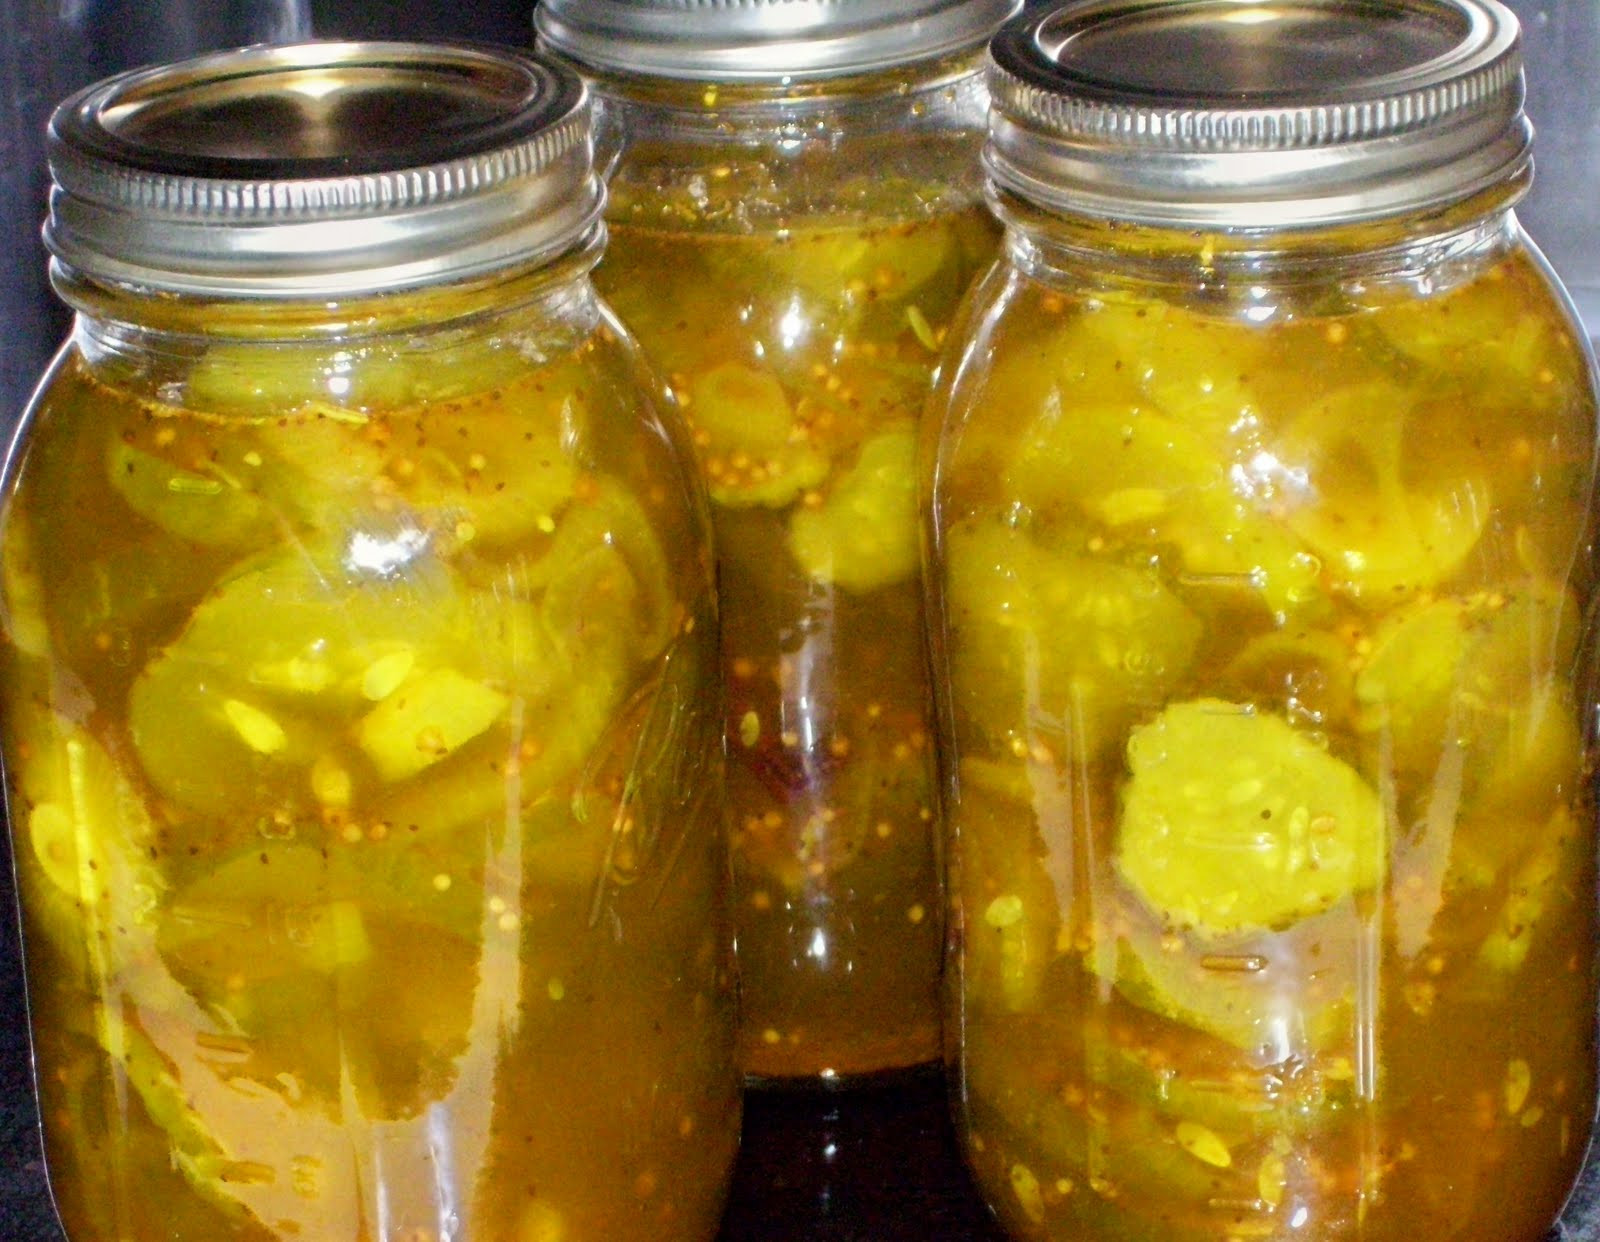 Bread And Butter Pickles Recipe No Canning
 Food Memories 102 Bread and Butter Pickles No Canning